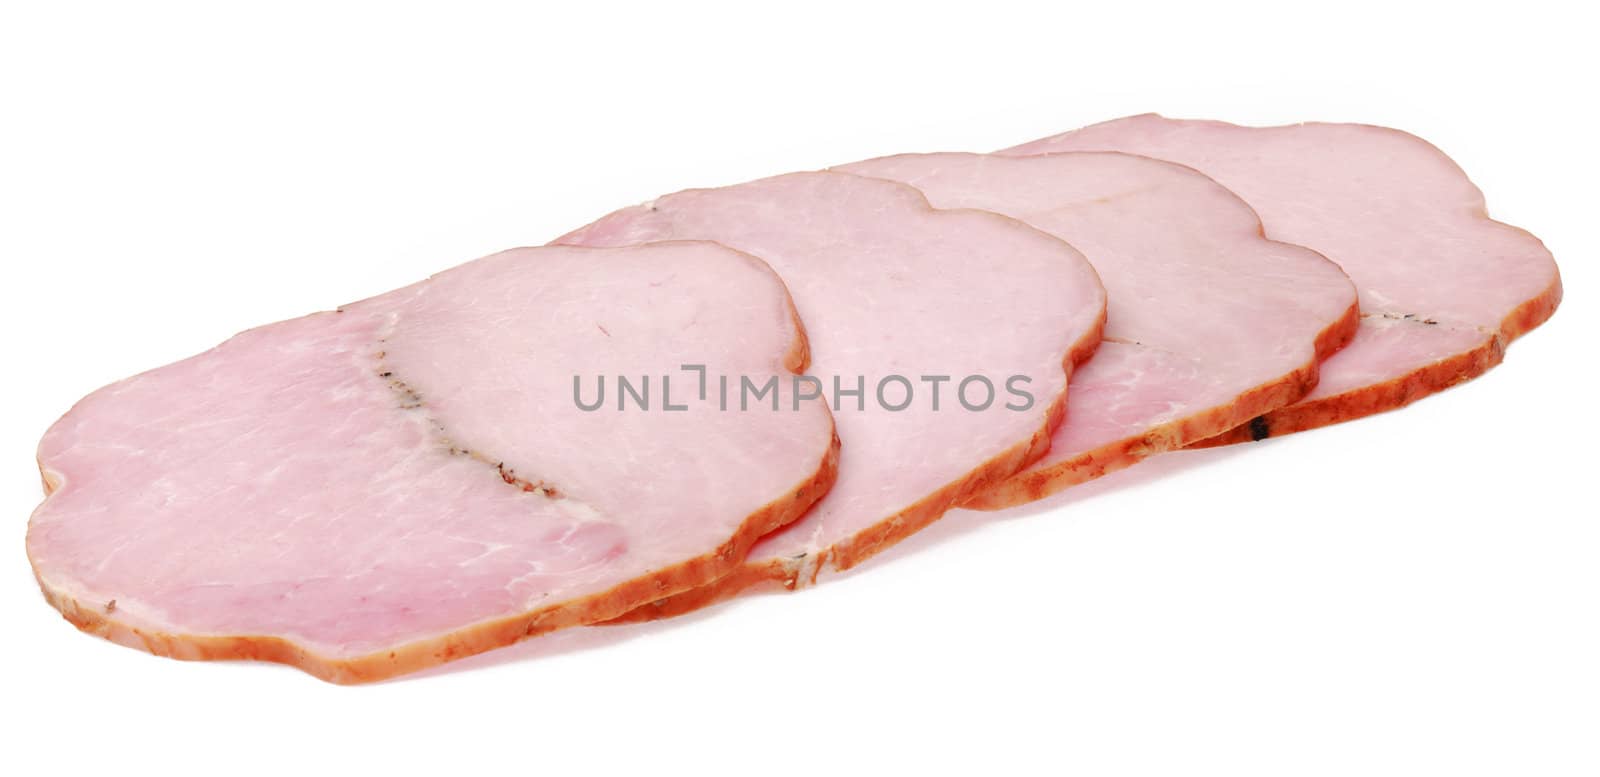 Four slices of pork meat roll against a white background.